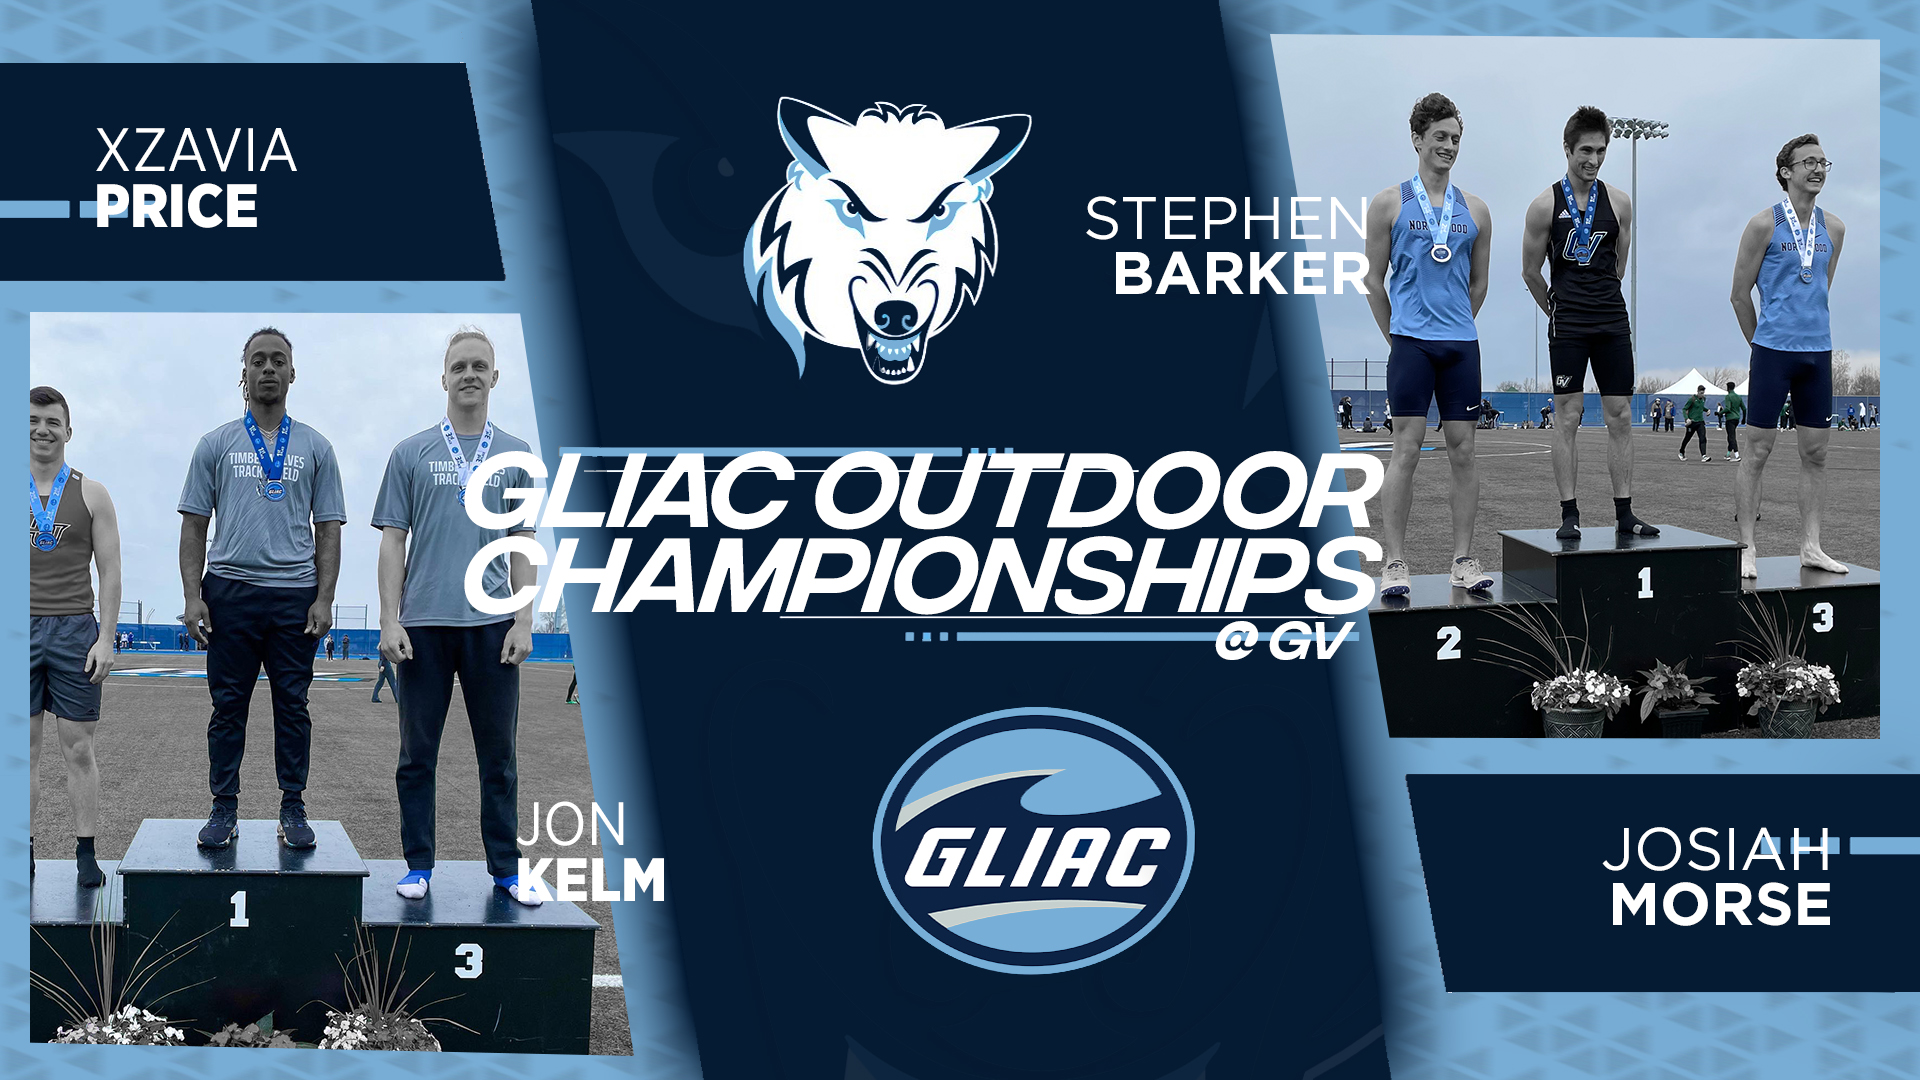 Men's Track & Field Takes Third At The GLIAC Championships As Teams Compete At Grand Valley